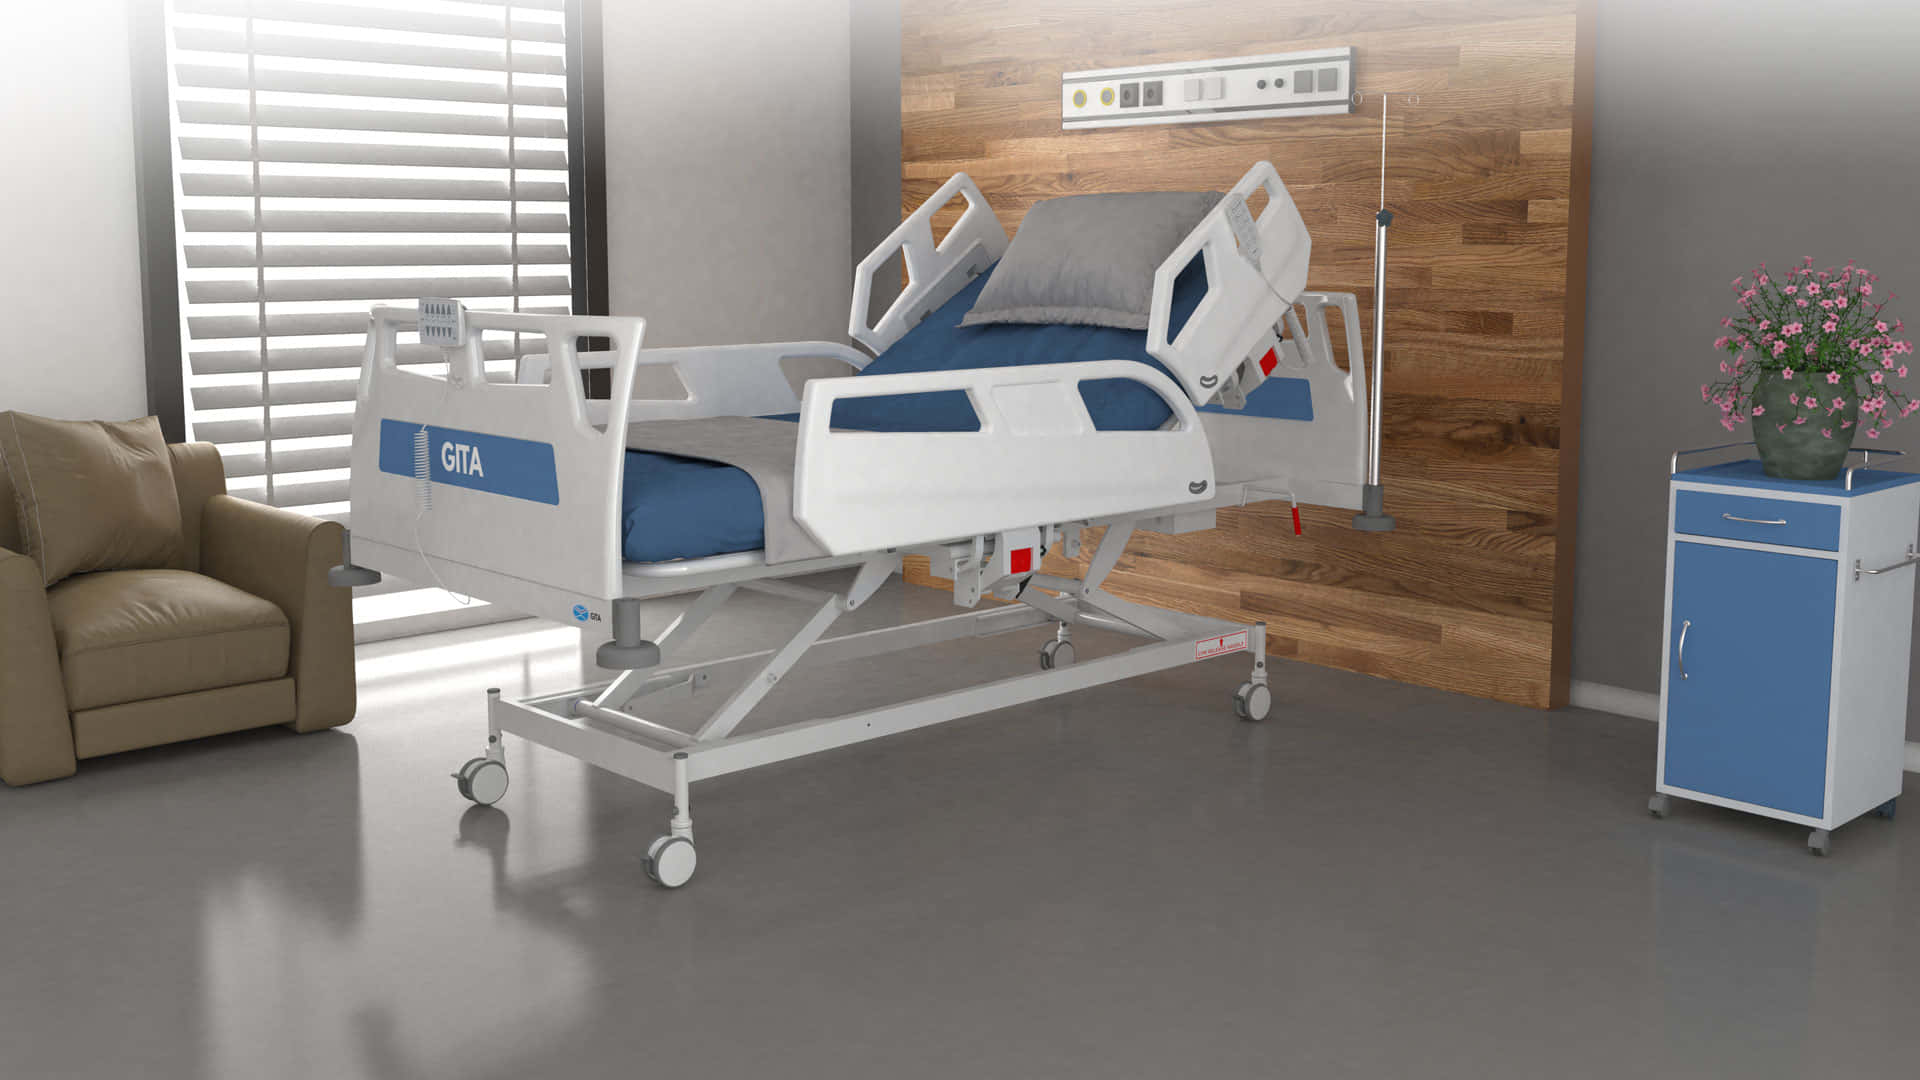 Electric Hospital Bed In Icu Wallpaper